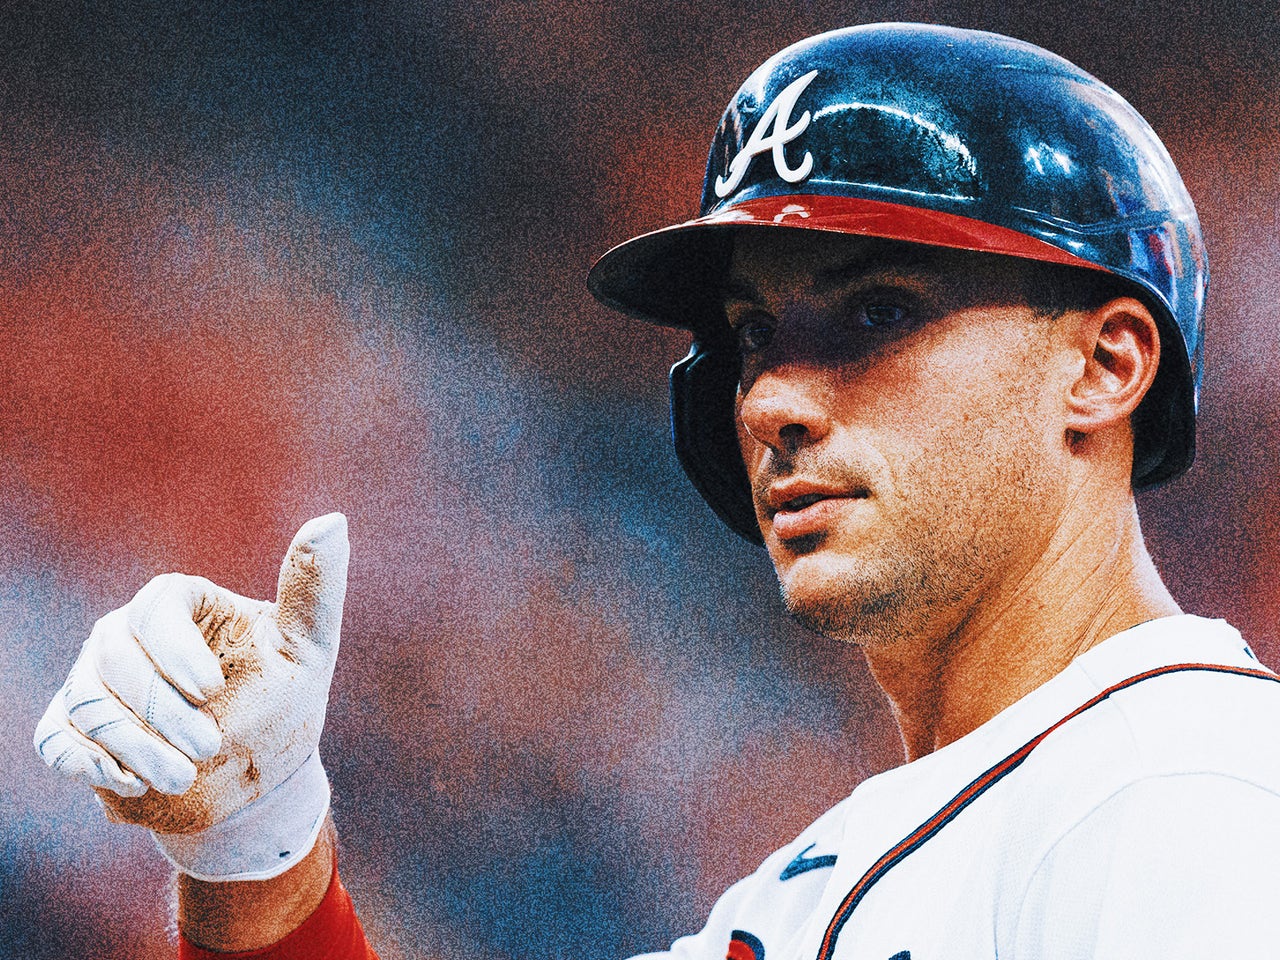 Matt Olson is filling one Braves legend's shoes and pushing another